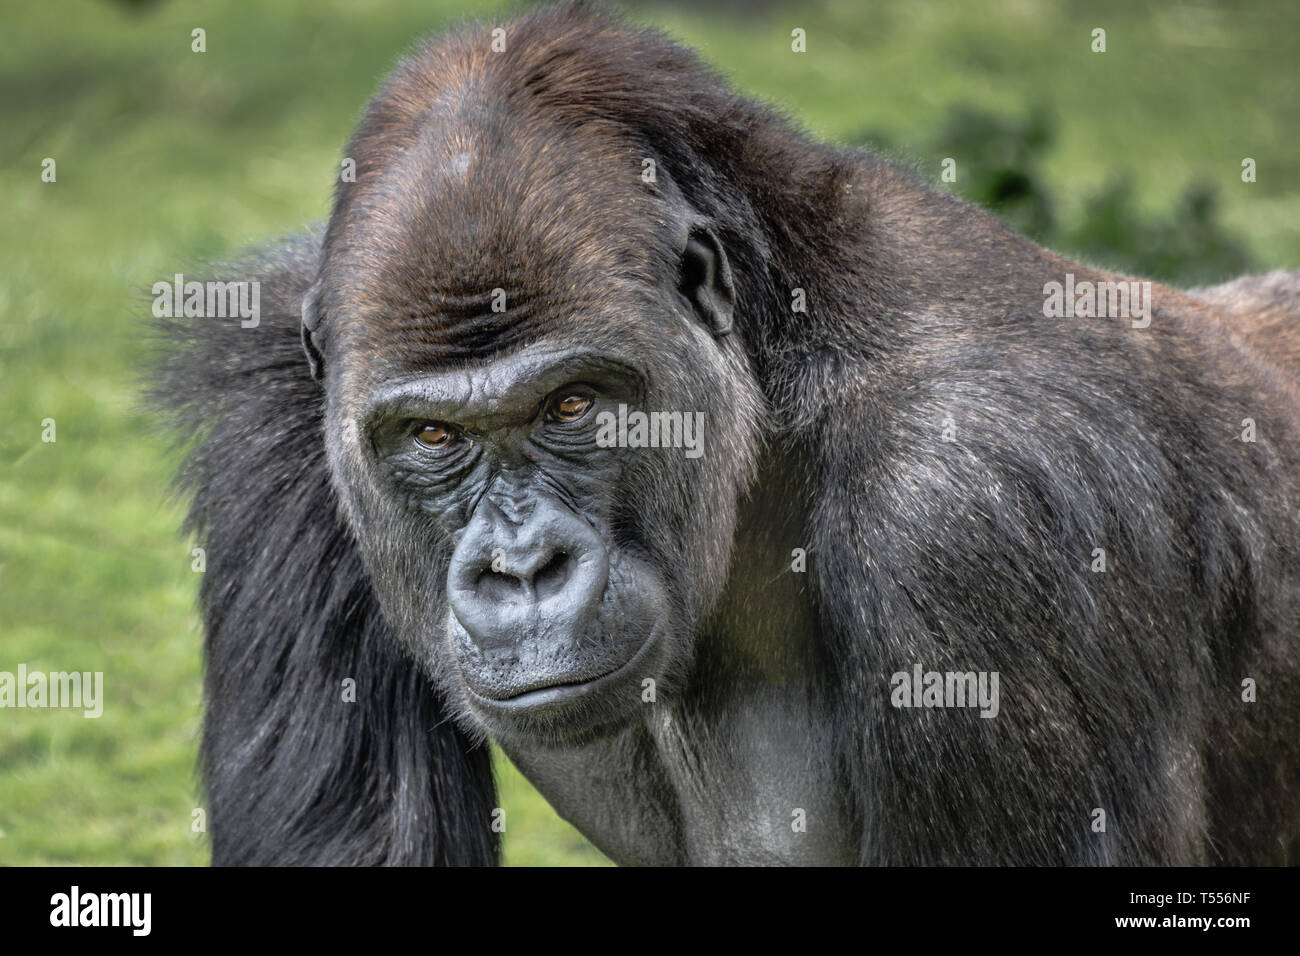 A very close up portrait of a male silverback gorilla showing head and shoulders and staring forward with menacing eyes Stock Photo